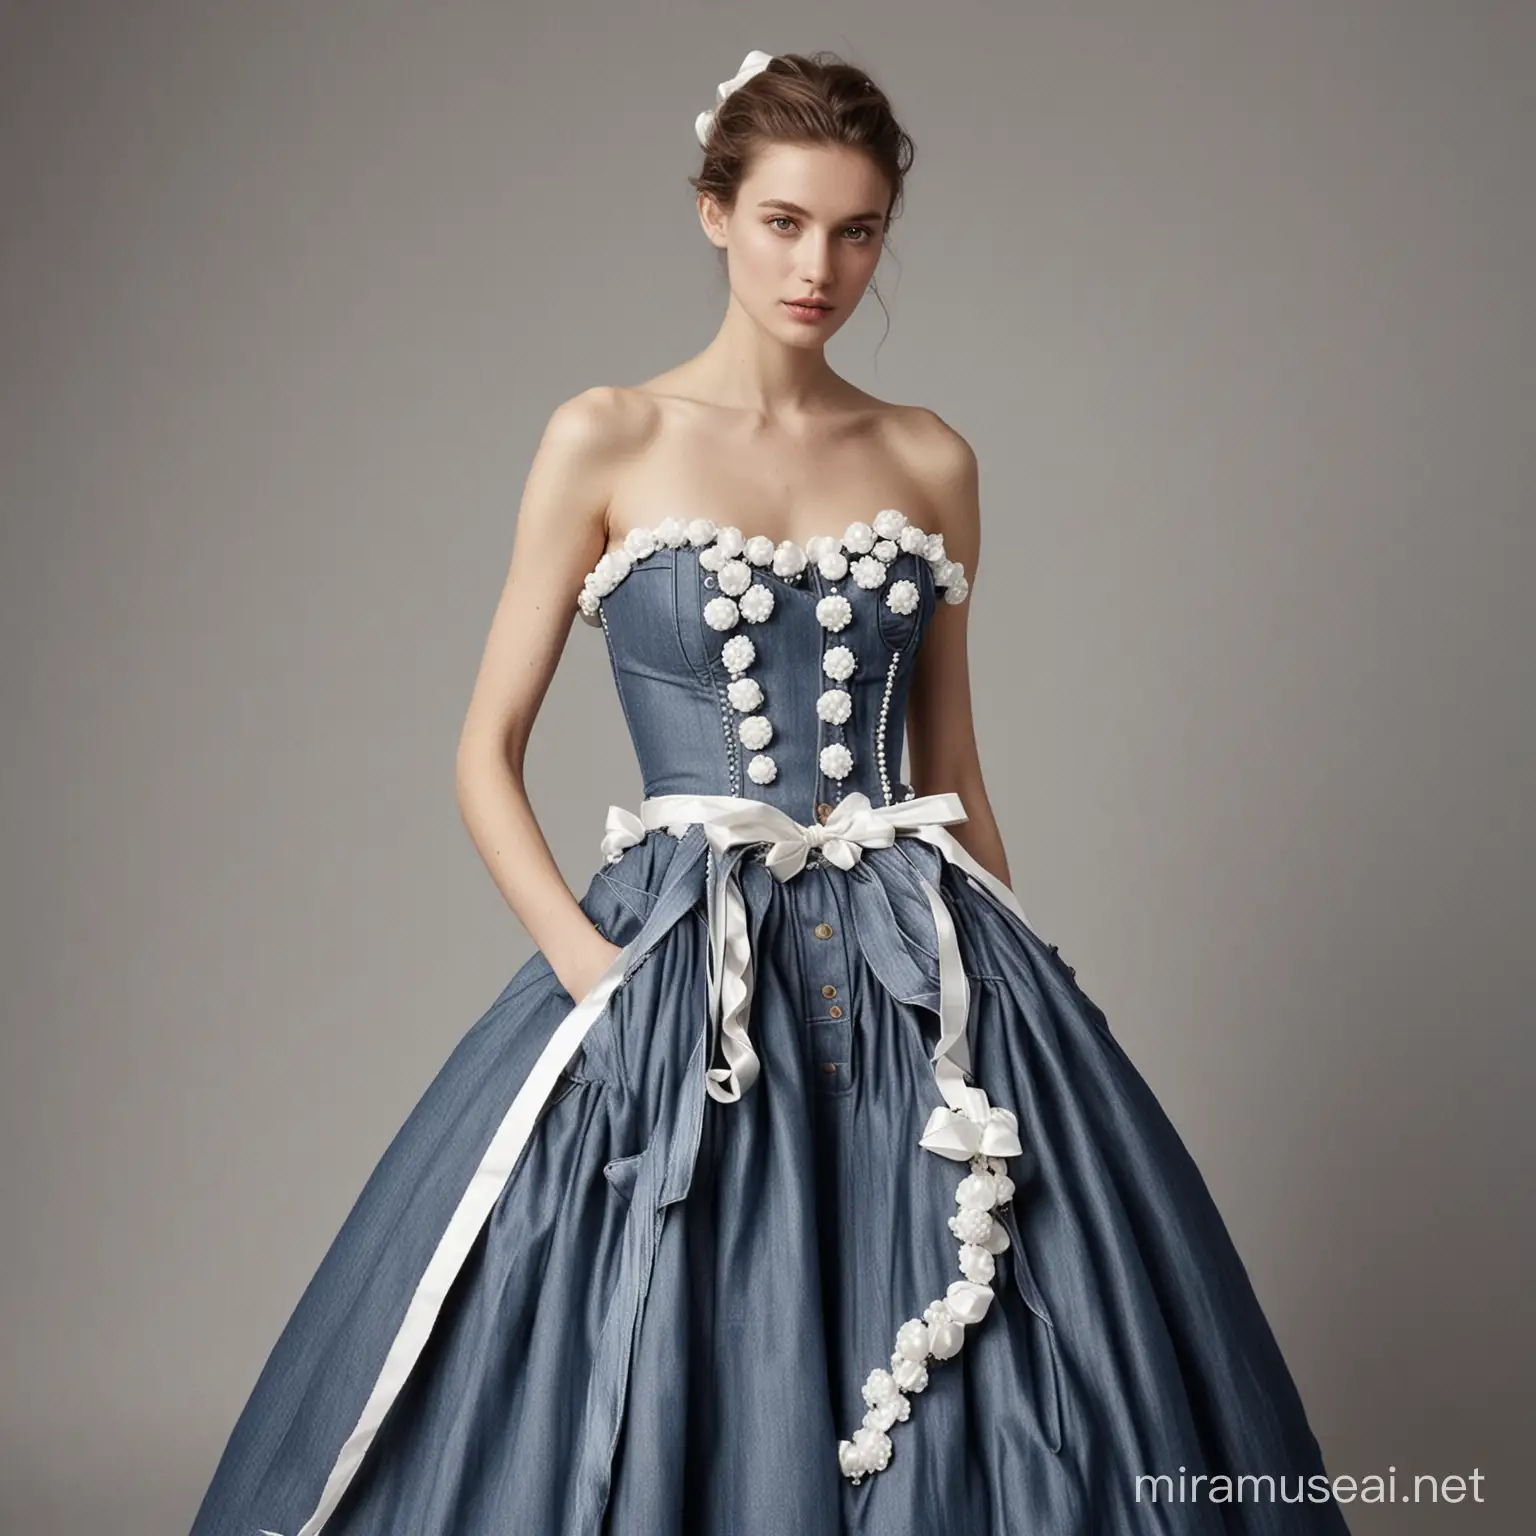 a female french model wearing a ballgown made out of denim with large pearl buttons and ribbons